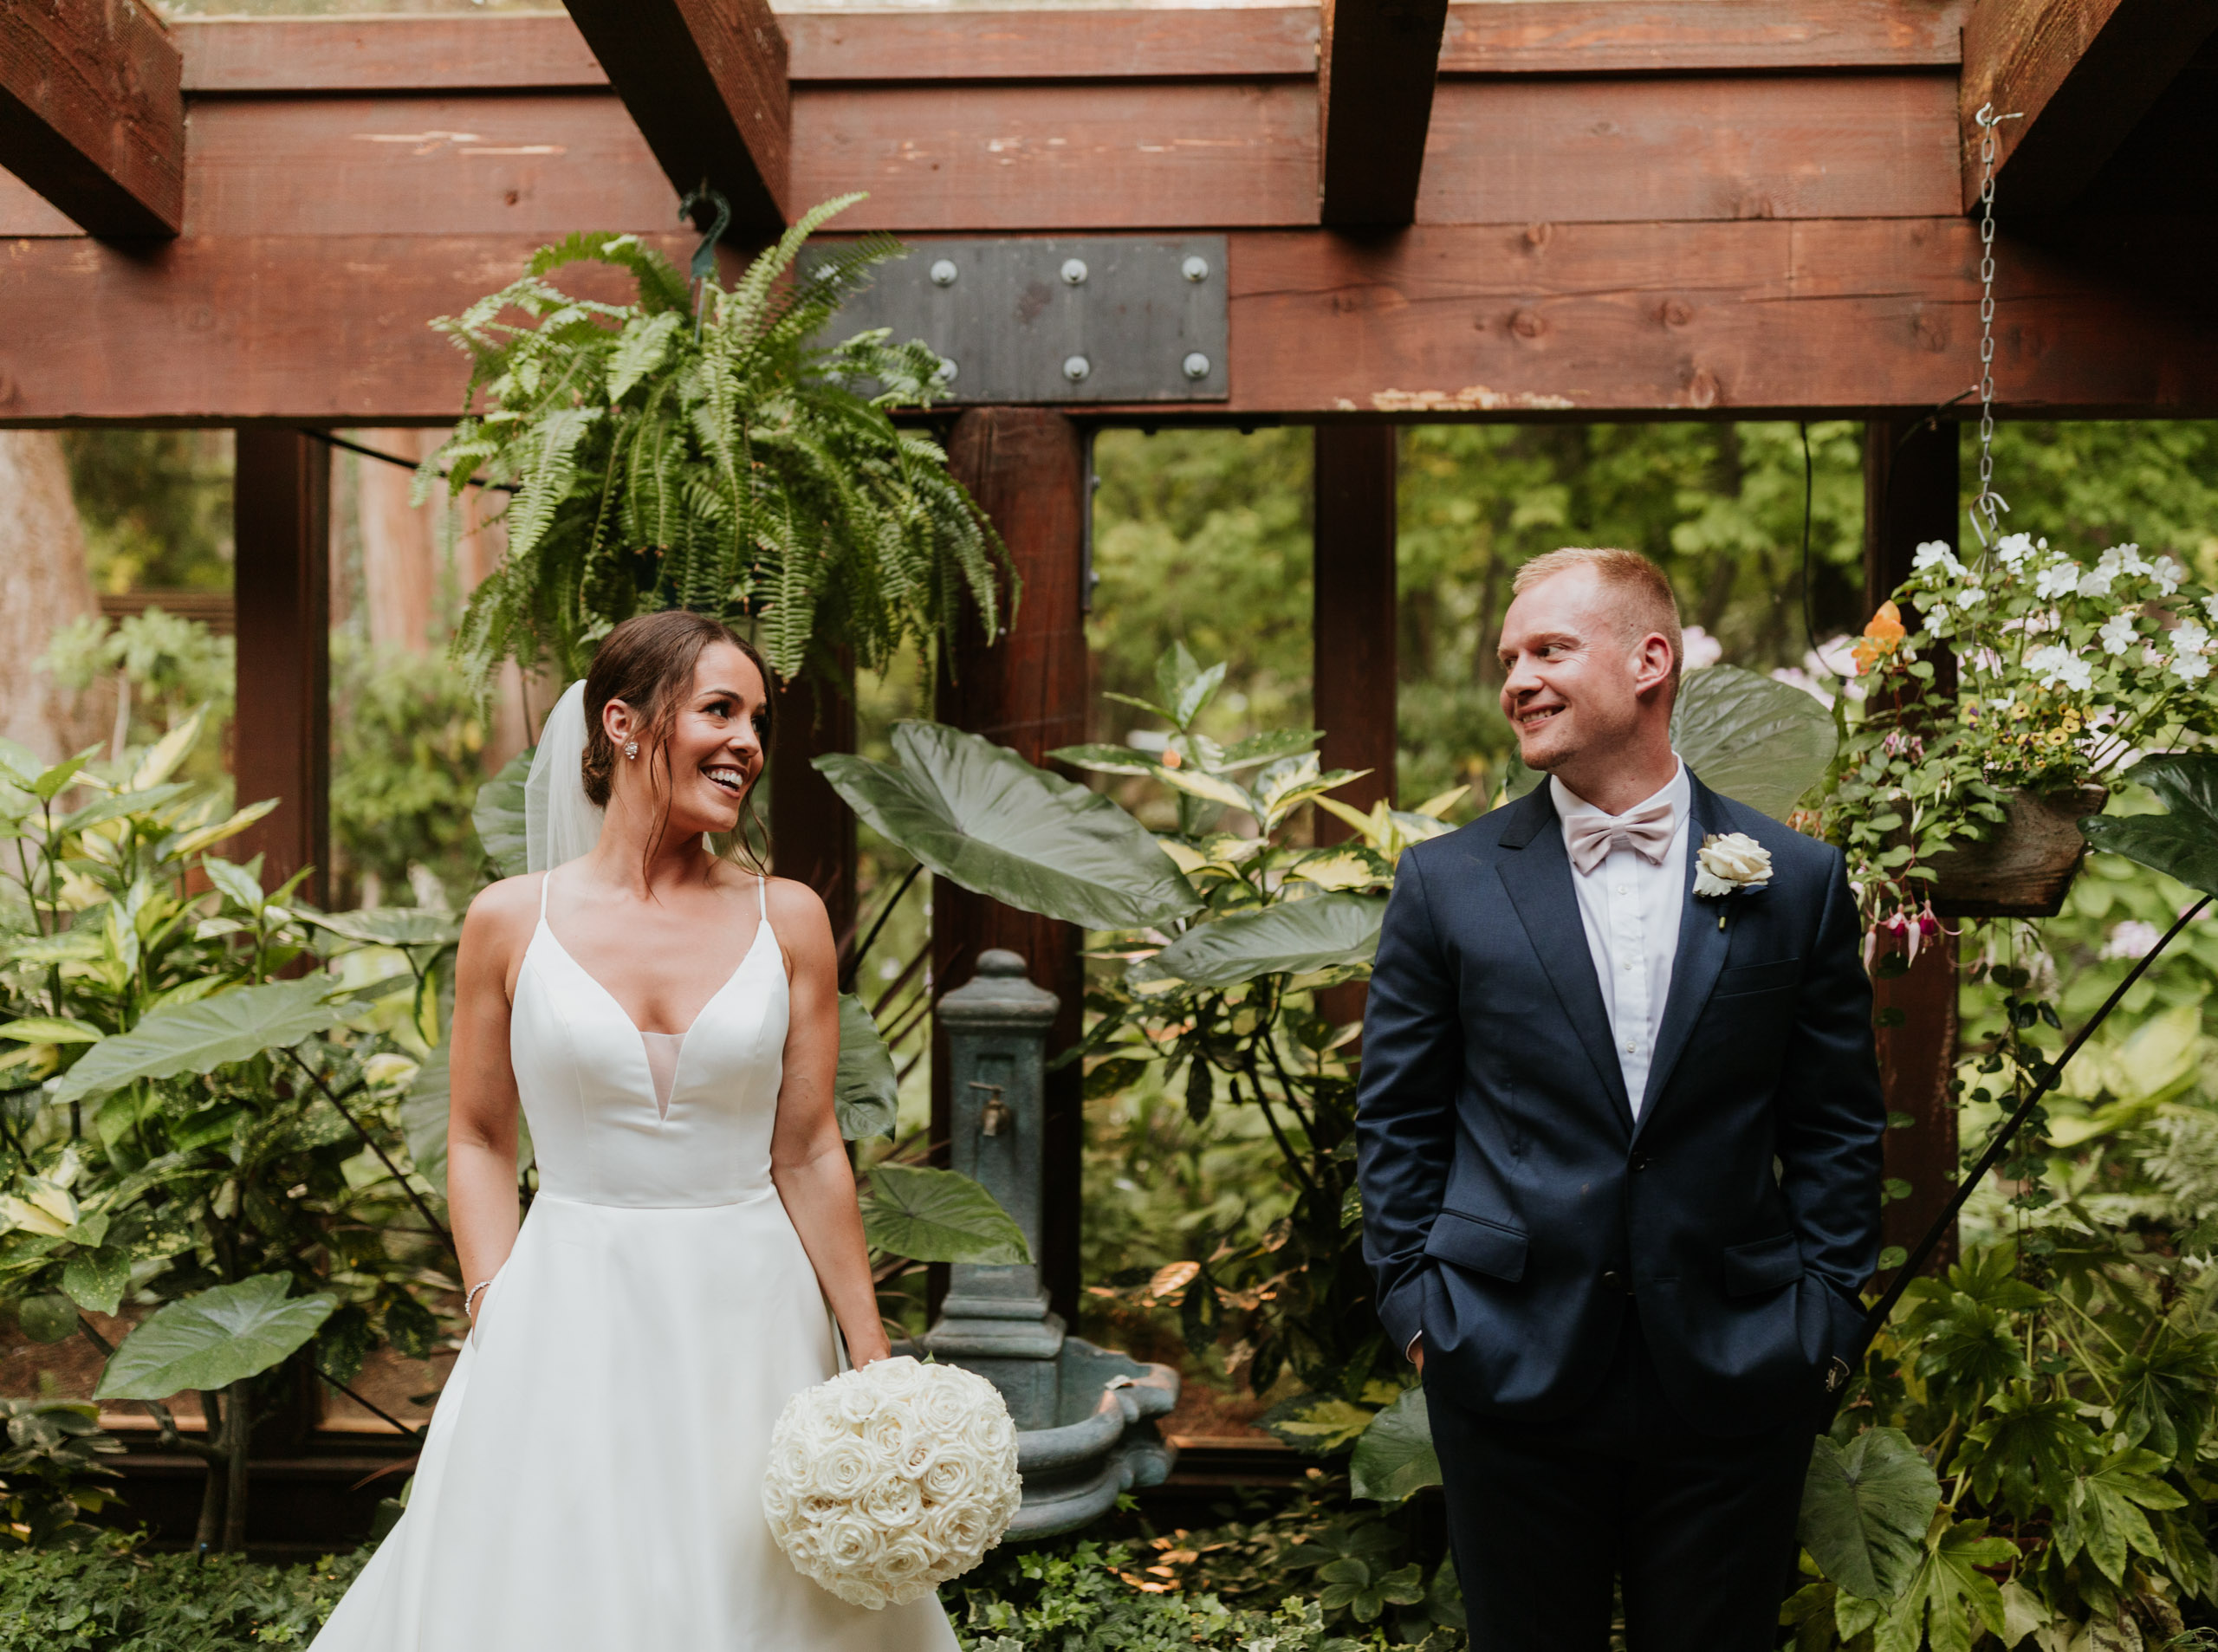 https://breannapluskevin.com/wp-content/uploads/photo-gallery/imported_from_media_libray/kiana-lodge-wedding-bm-breanna-plus-kevin-42.jpg